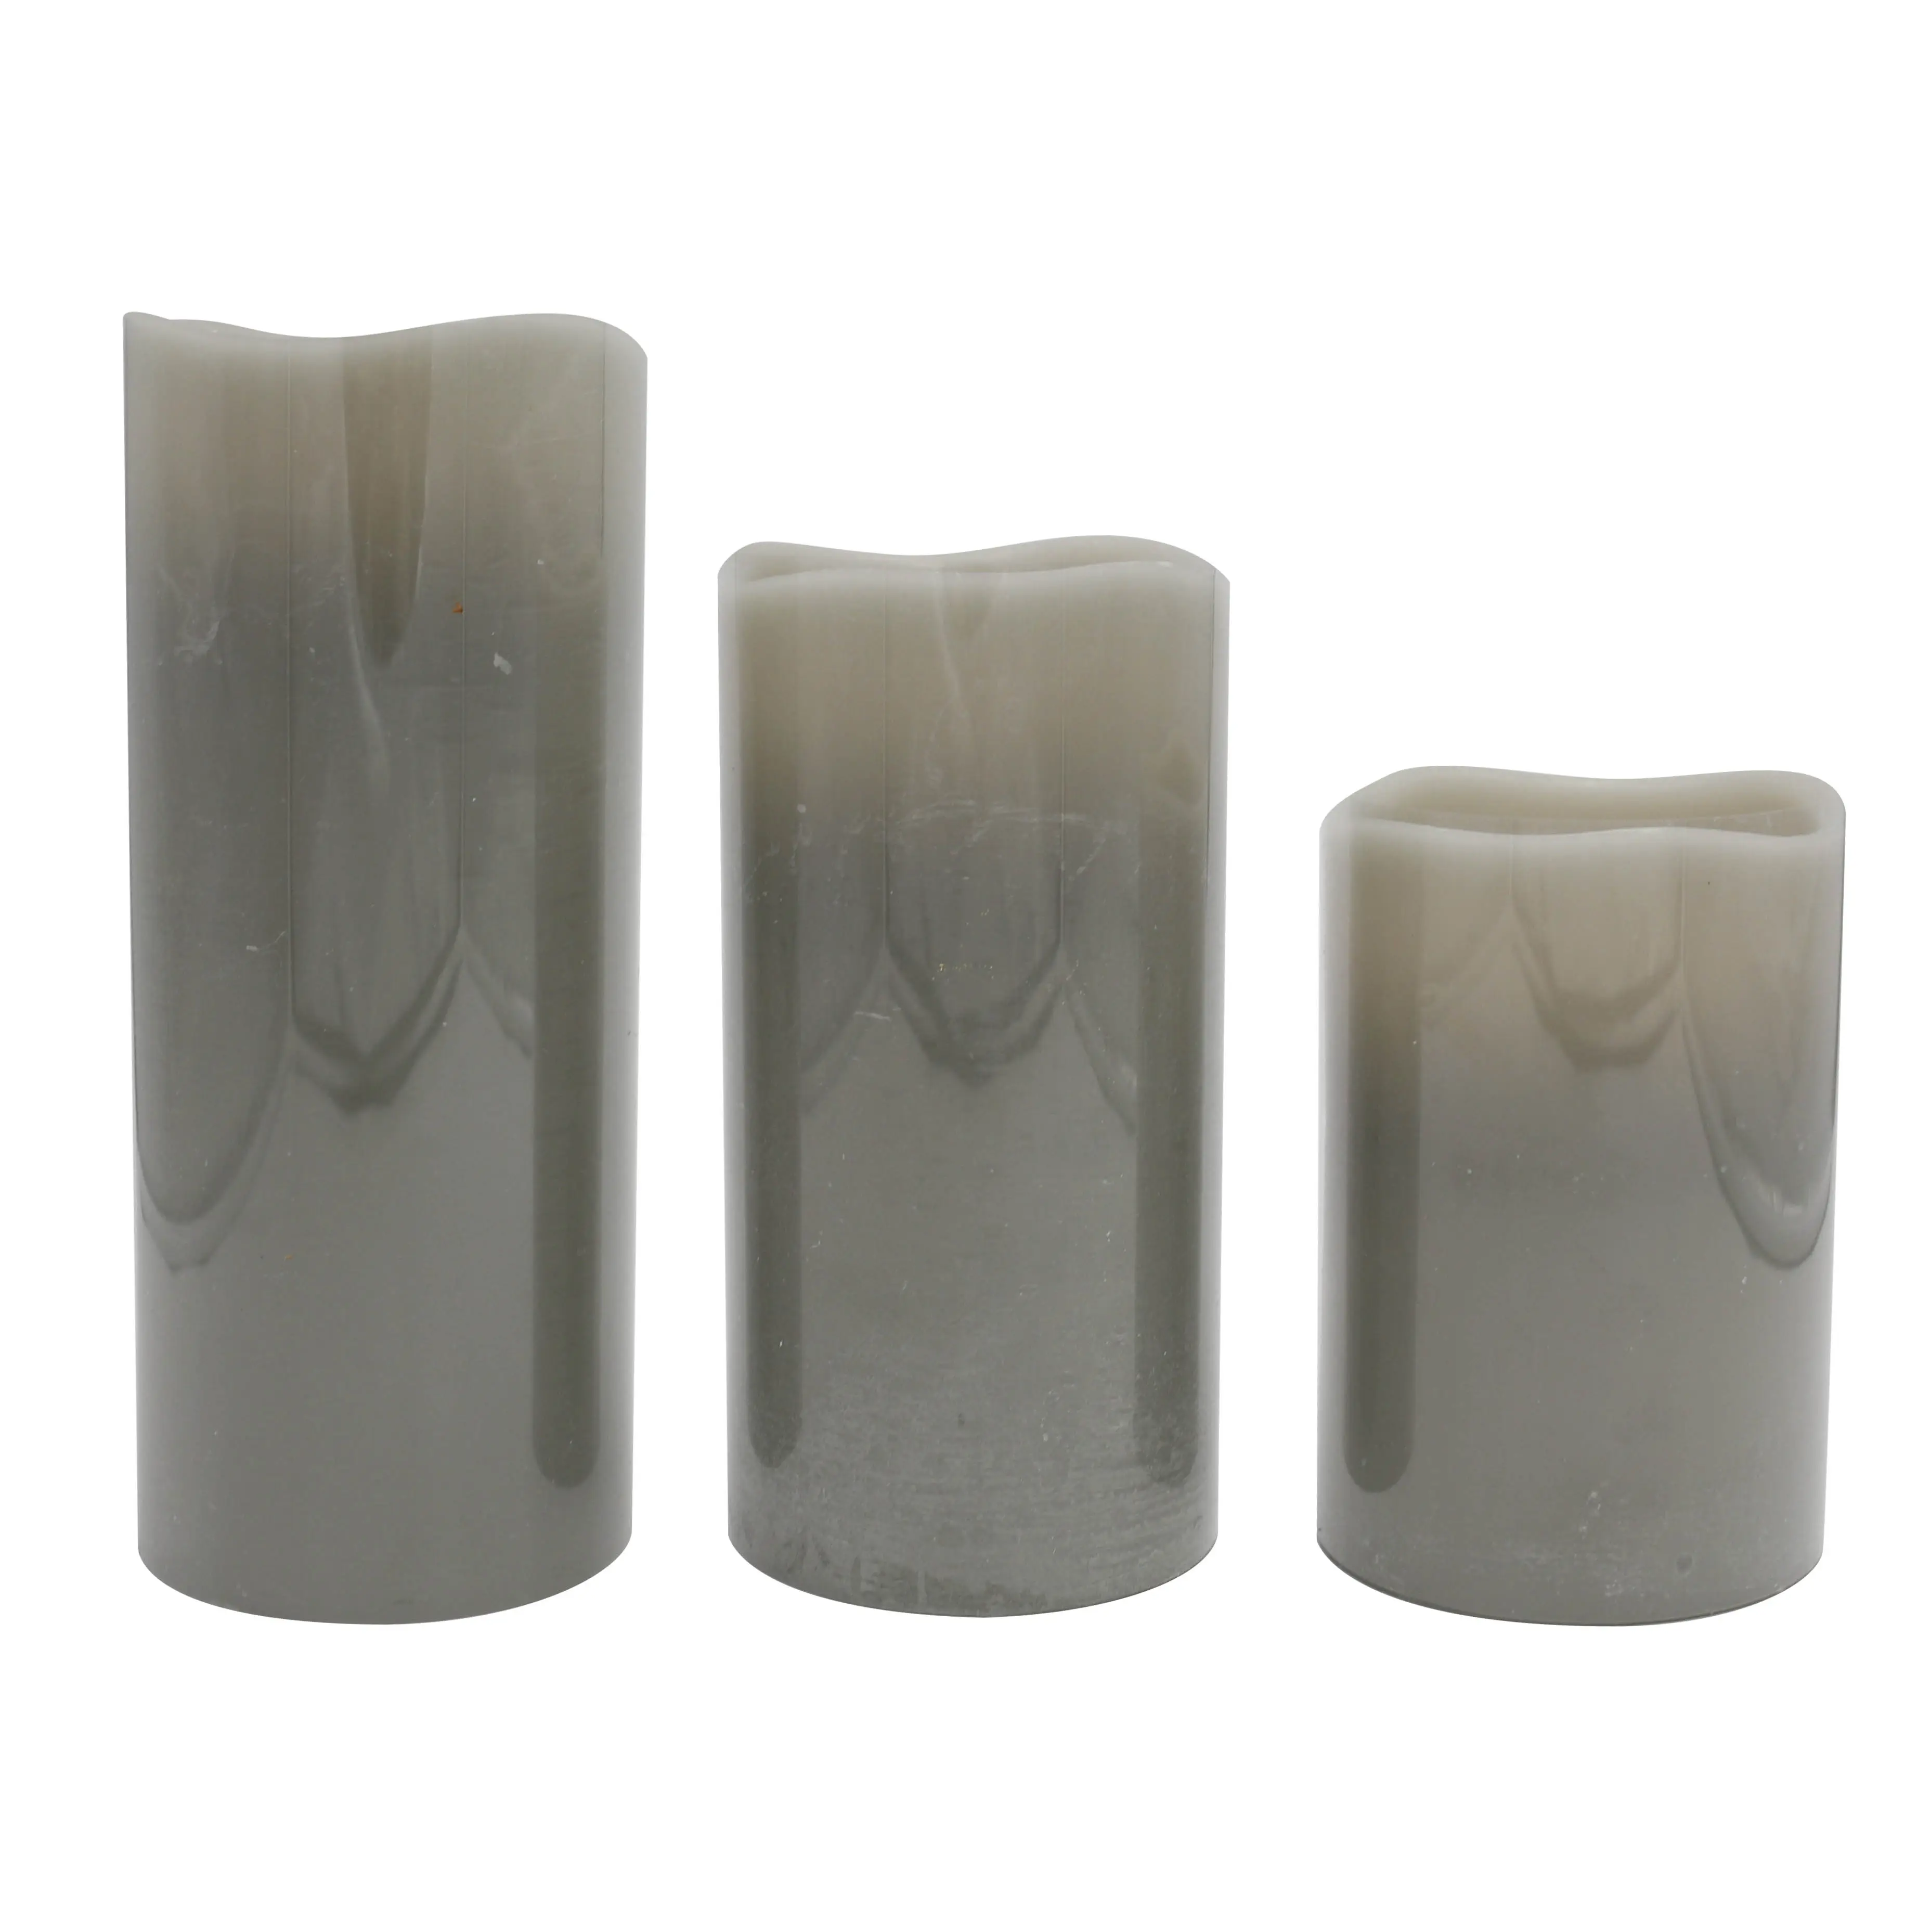 Unscented light green lED wax candle with realistic flame, Irregular edge ,smooth finish, real wax (set of 3)